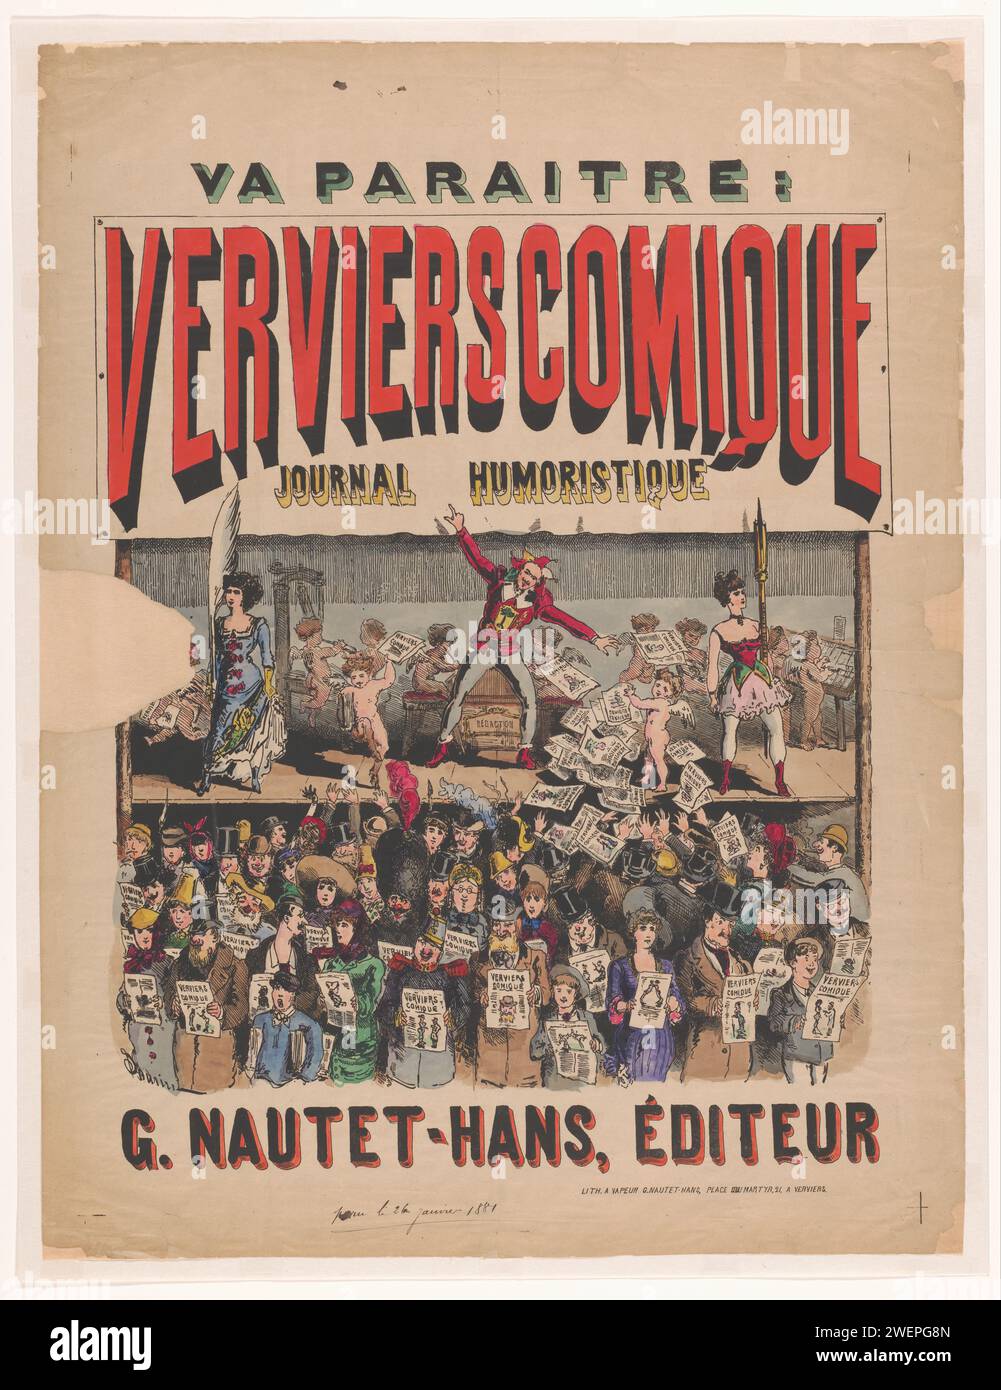 Poster for the magazine Verviers Comique Journal Humoristique, Anonymous, 1881 print. poster On a stage is a man in a fool's costume. To his left is a woman with a life -sized writing spring and a woman with a life -size chalk holder on the right. Putti are involved in writing, putting, printing and distributing the magazine. In front of the stage, a crowd of men and women with copies of the magazine are in their hands.  paper  set, scenery  stage. court jester, court fool. quill. tools, implements of draughtsman. cupids: 'amores', 'amoretti', 'putti'. printing press Stock Photo